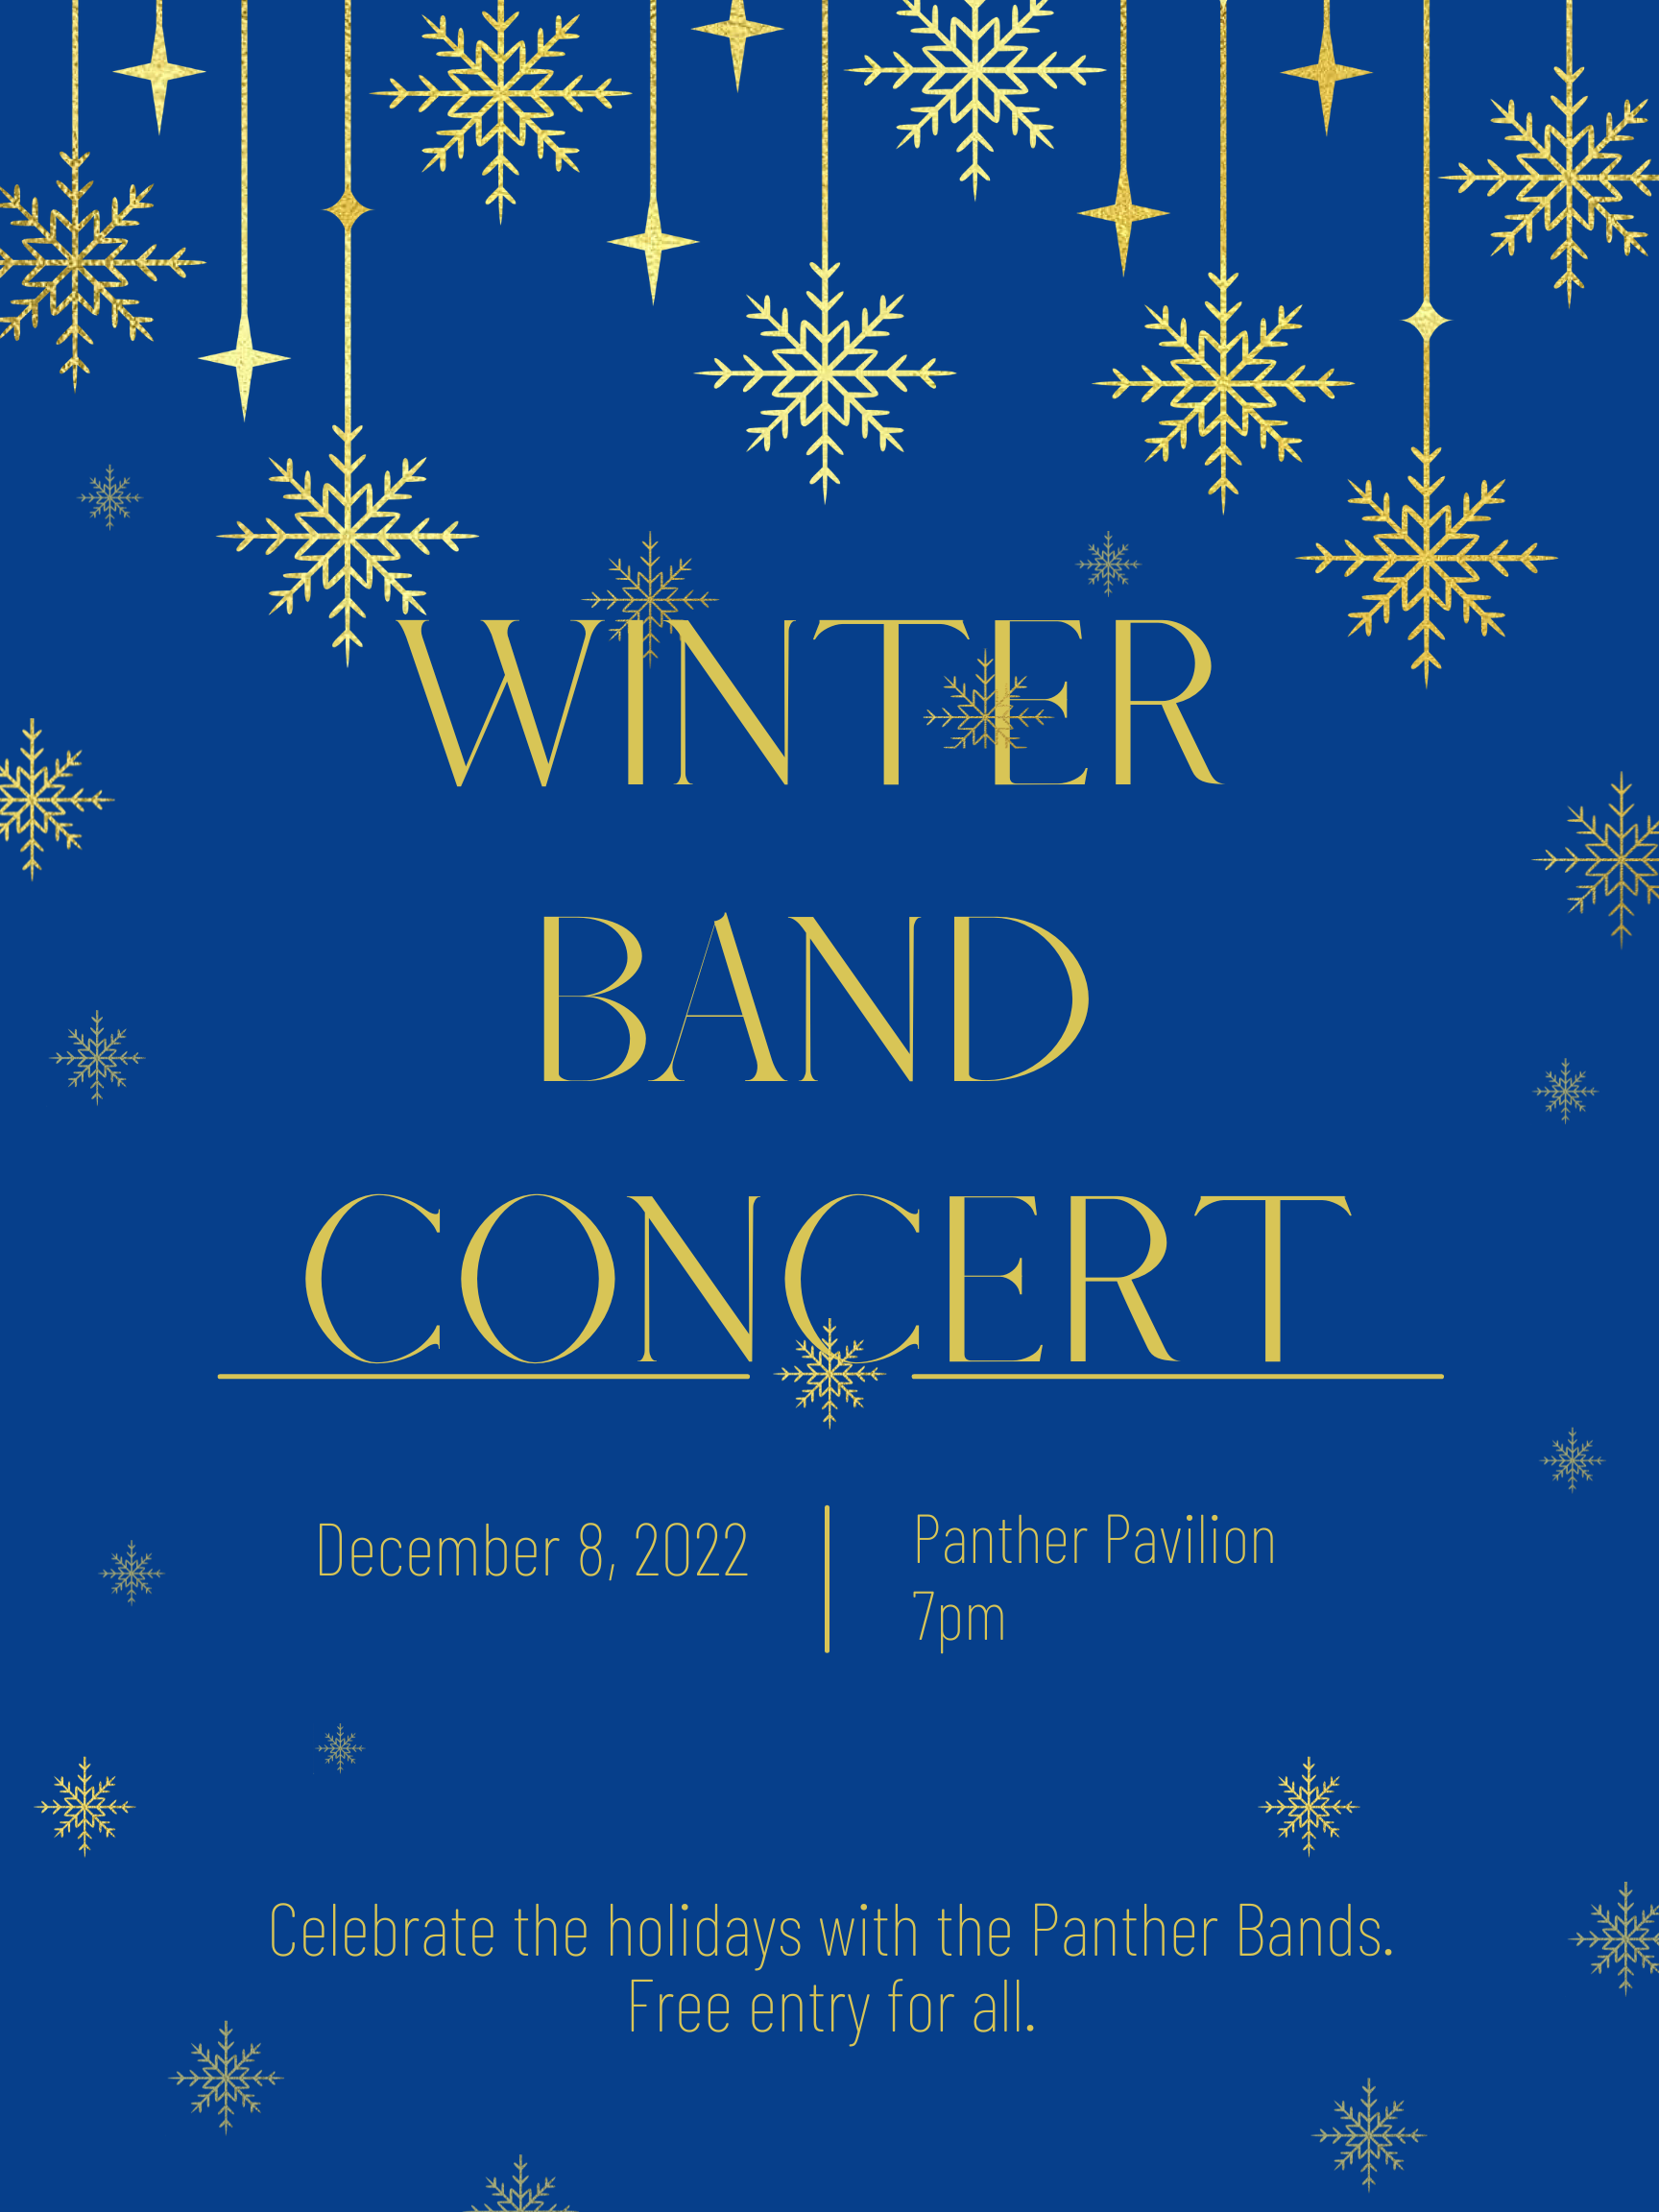 Winter Band Concert Scheduled for December 8